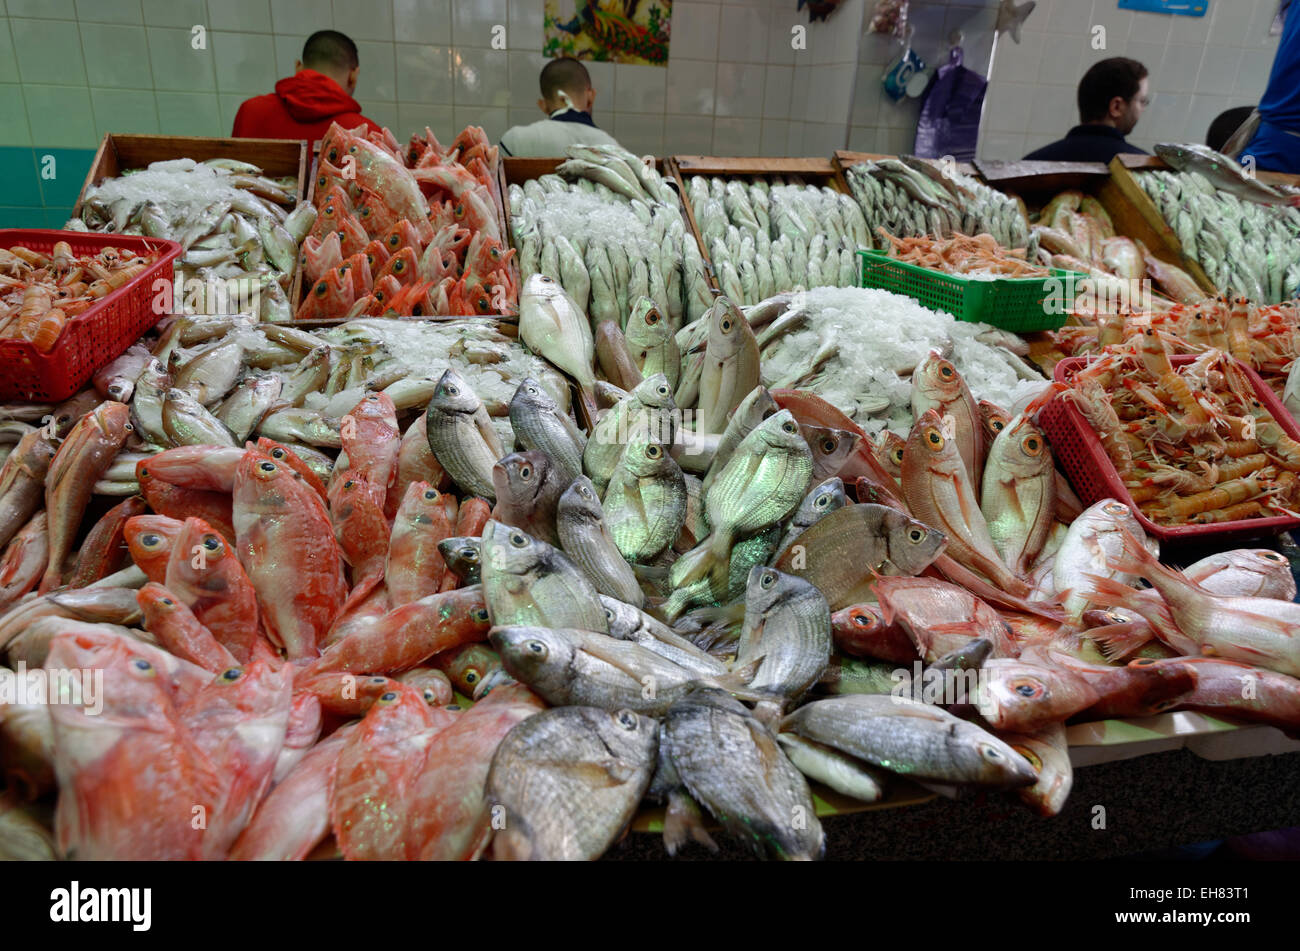 Freshly caught fish displayed in Tangier fish market, Tangier, Morocco, North Africa, Africa Stock Photo